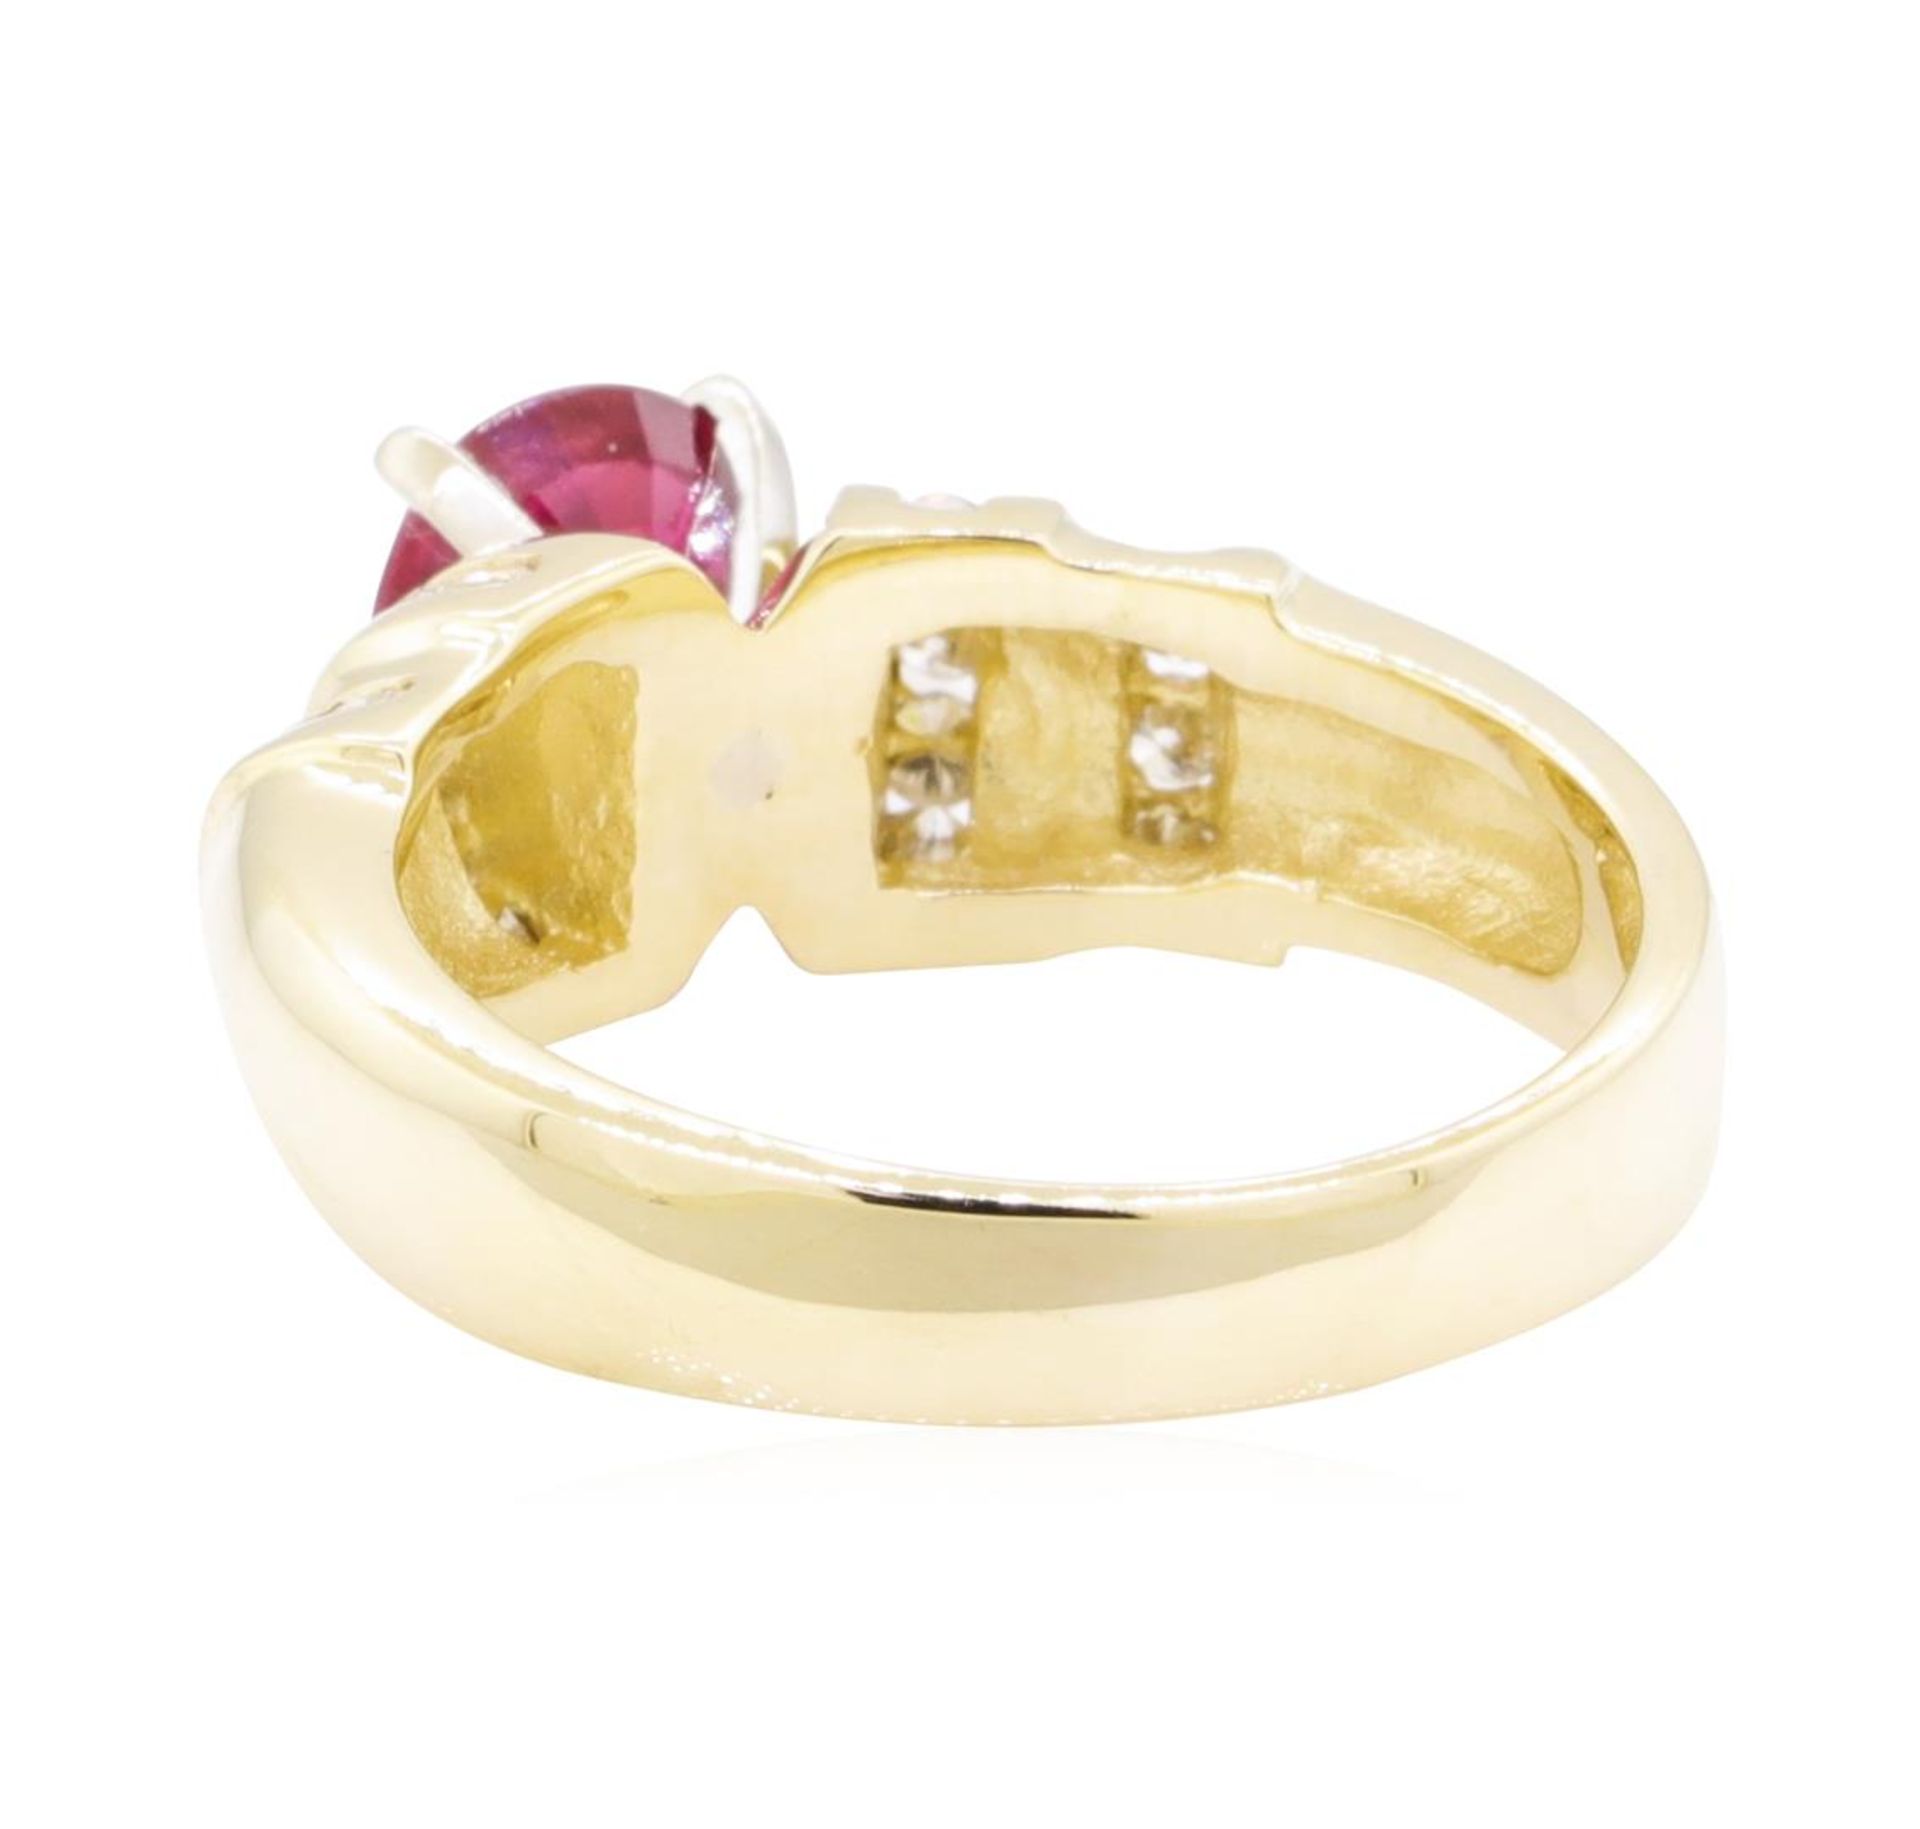 1.67 ctw Ruby And Diamond Ring - 14KT Yellow Gold - Image 6 of 10